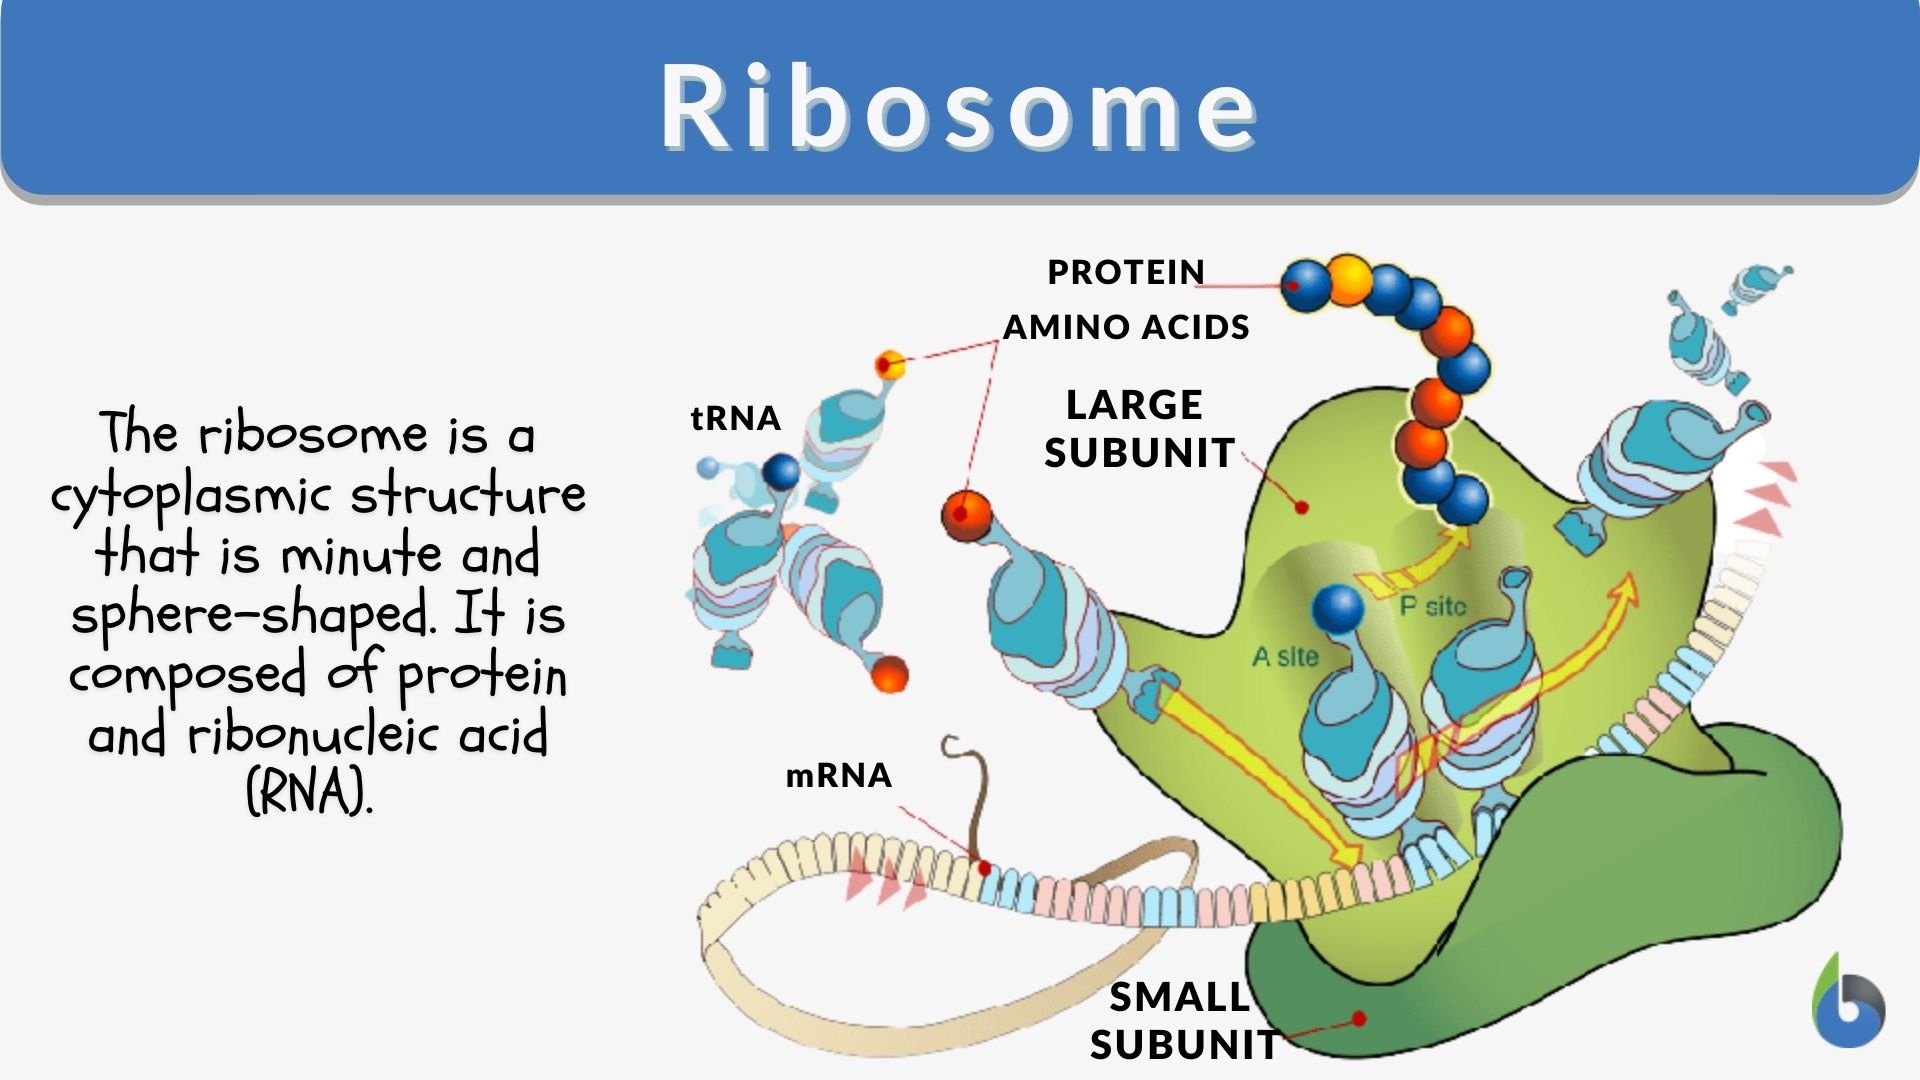 Ribosome Definition and Examples - Biology Online Dictionary